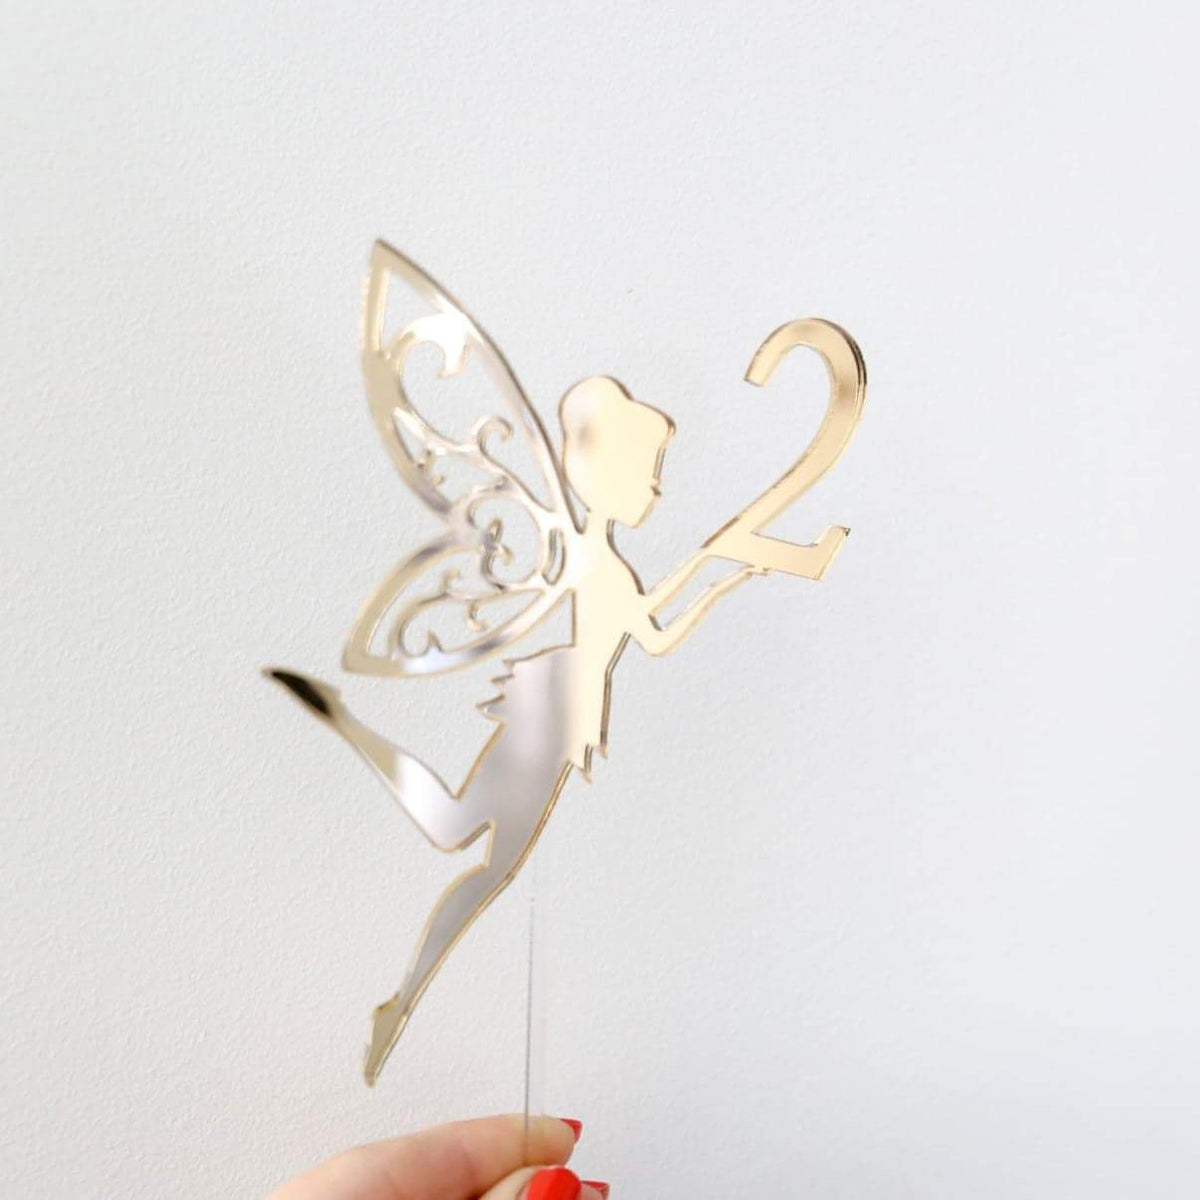 Fairy Number Cake Topper